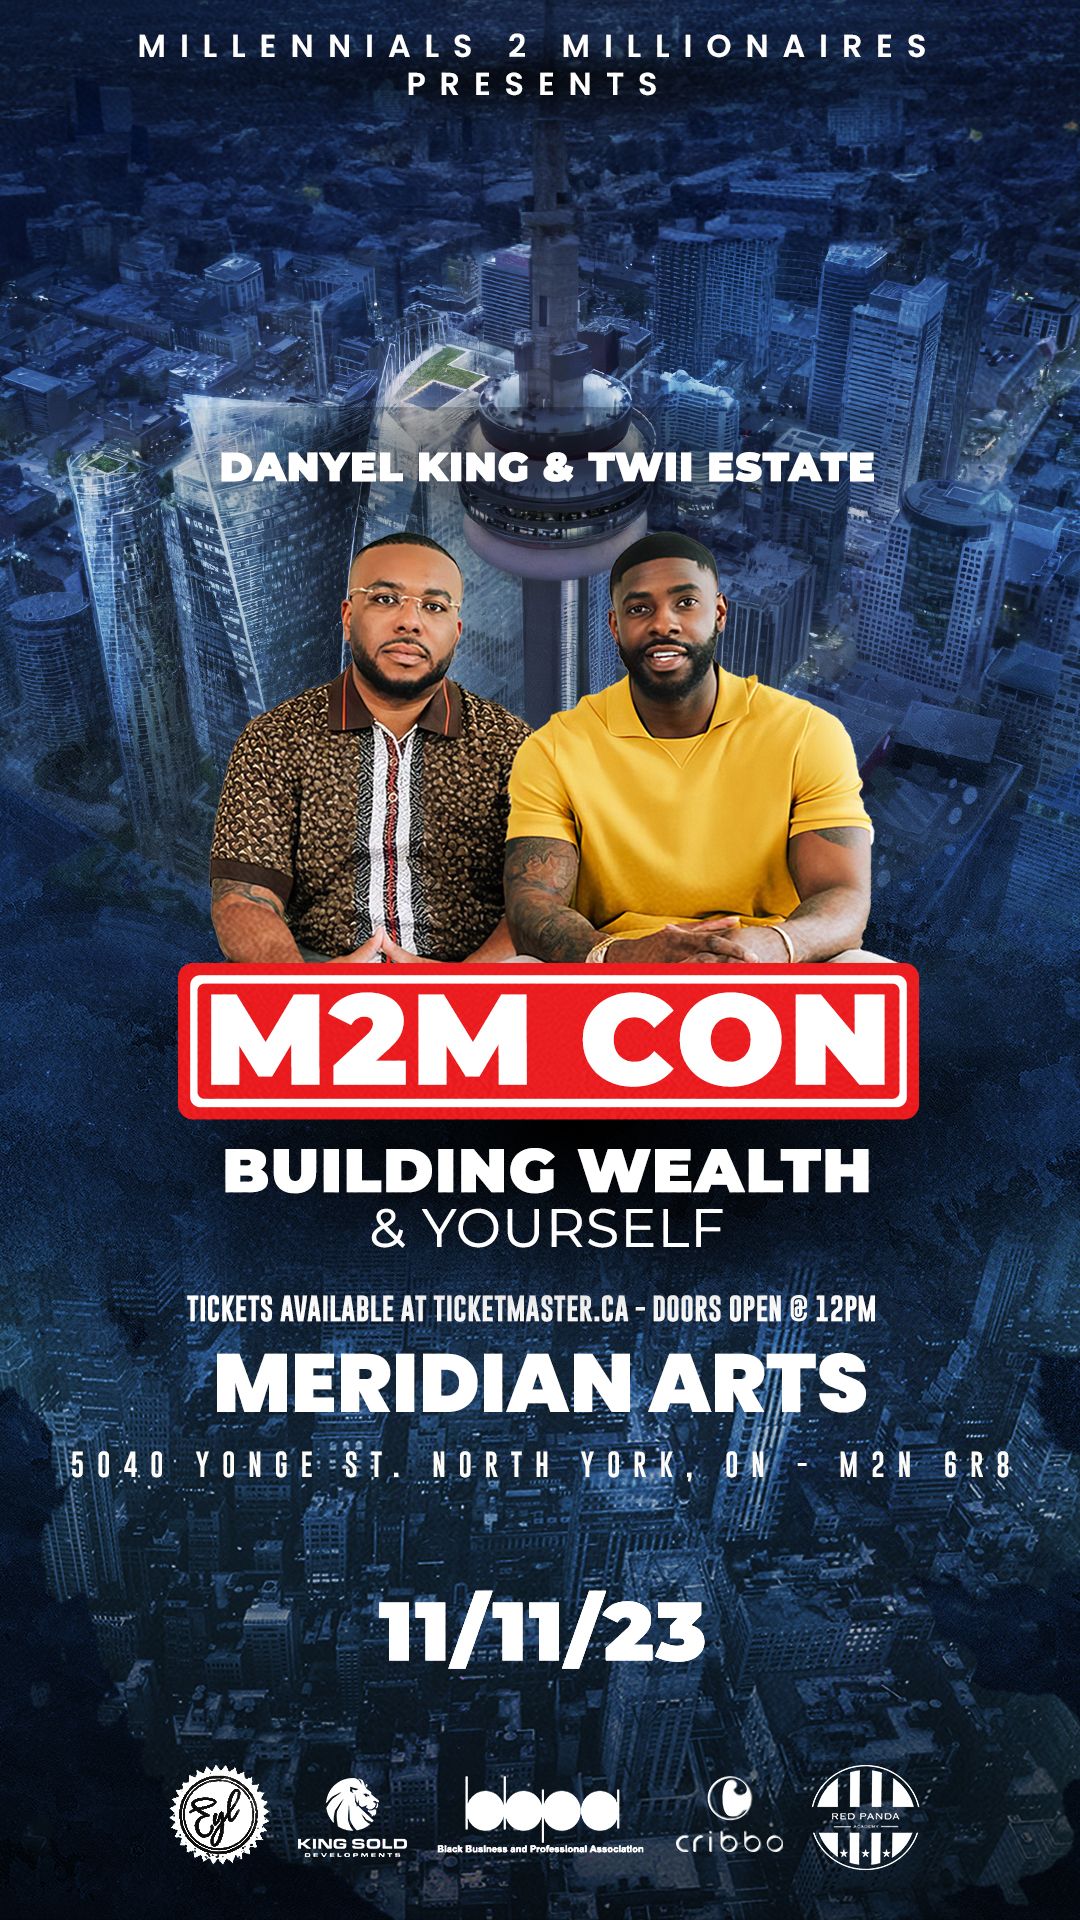 SAVE THE DATE: Millennials 2 Millionaire's M2M CON to provide real estate, investment, and entrepreneurship tips at Meridian Arts Centre Nov. 11